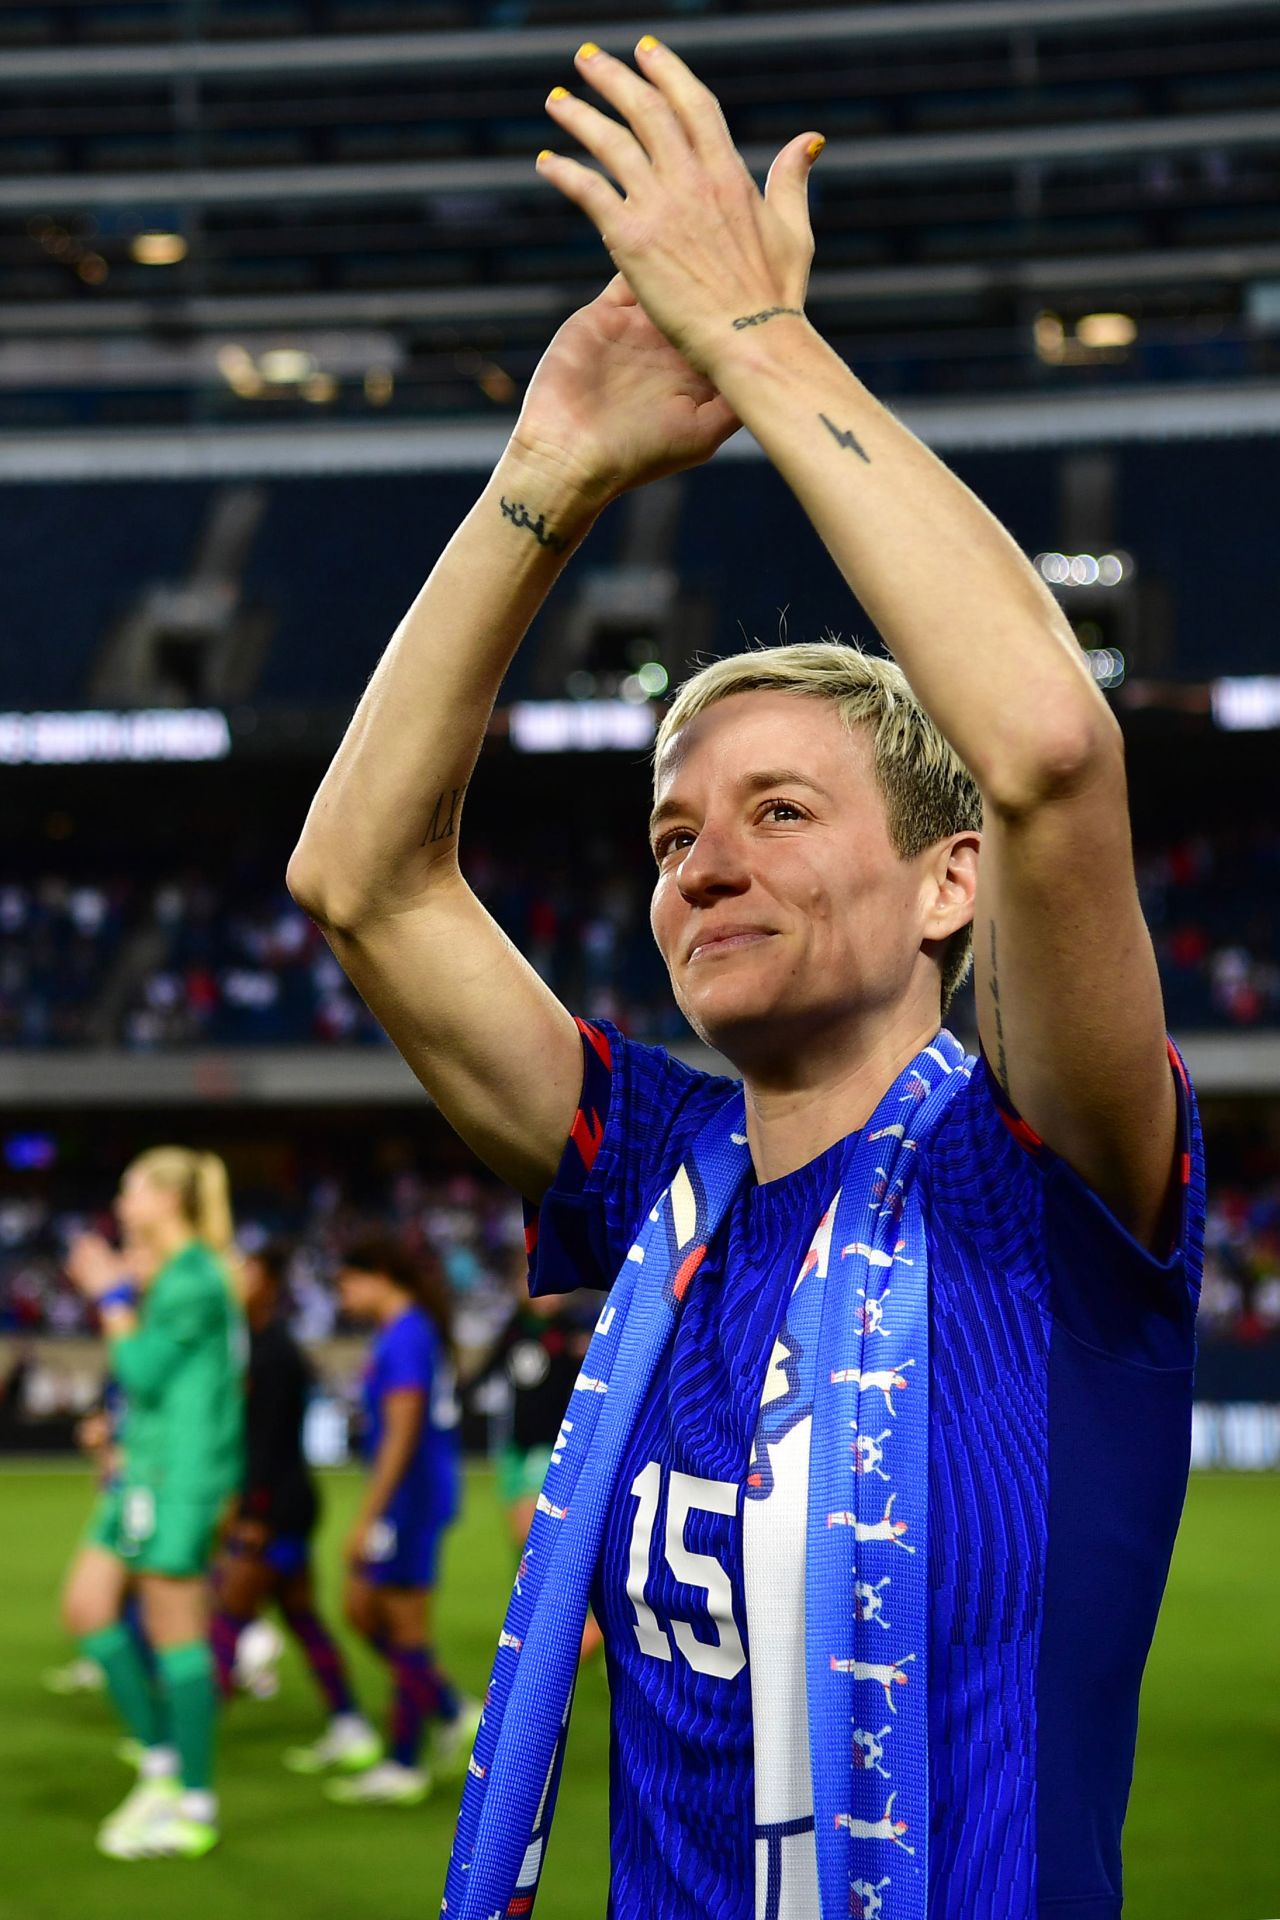 Rapinoe acknowledges fans after her<a href="https://www.cnn.com/2023/09/24/us/megan-rapinoe-final-us-game-spt-intl/index.html" target="_blank"> final game with the US Women's National Team</a> in September 2023. She made 203 appearances with the team. "It has been such an honor to be able to wear this shirt and to play with all of these amazing players and to just live out my childhood dream casually in front of the world," she said in a speech after the game.